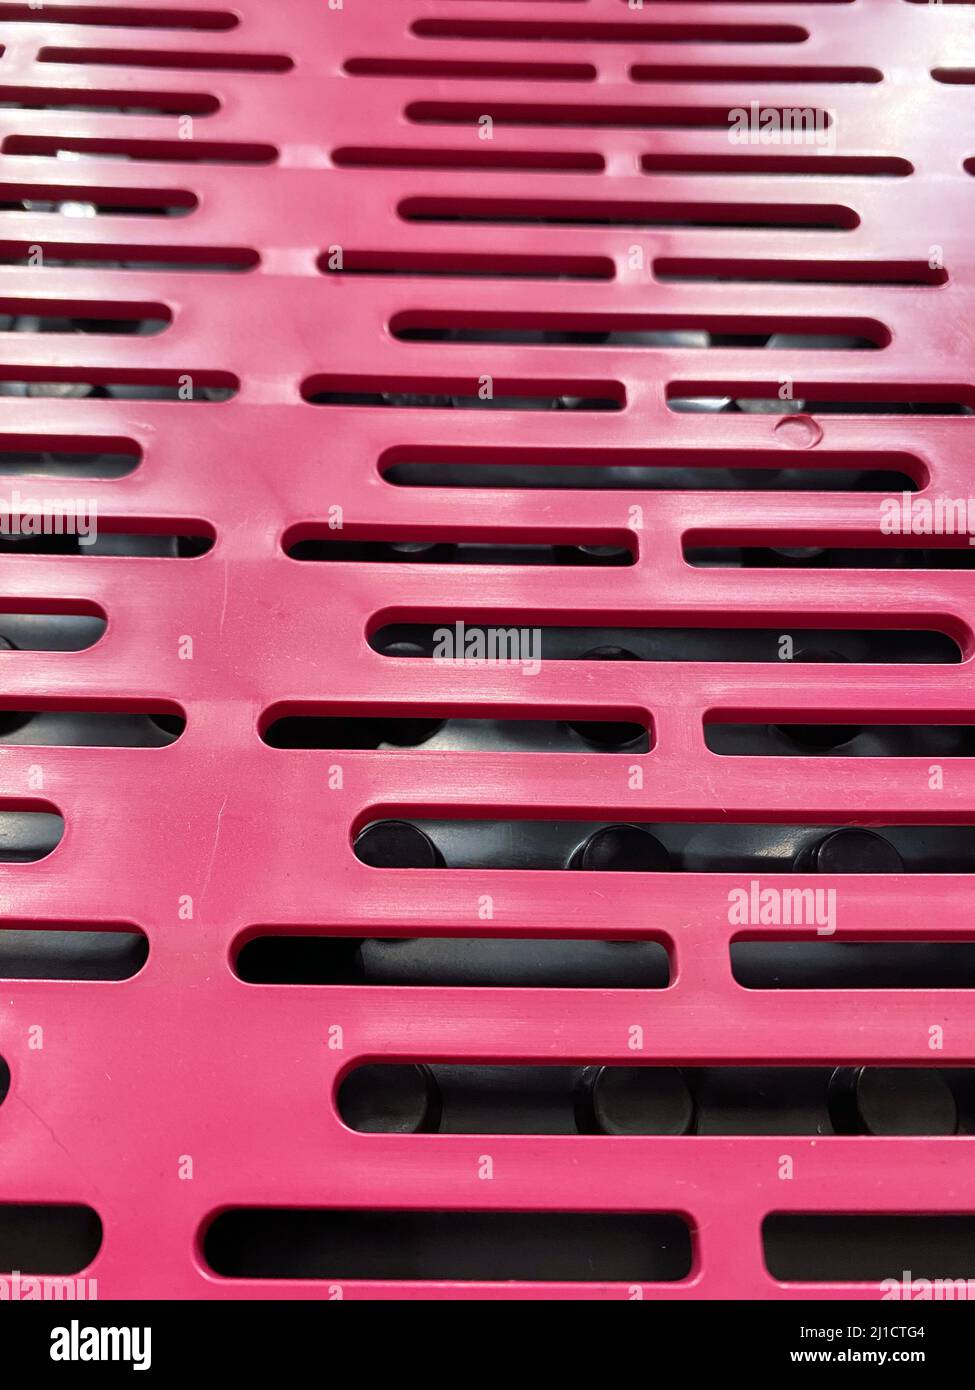 Injected plastic screen in pink, used in several markets. Stock Photo